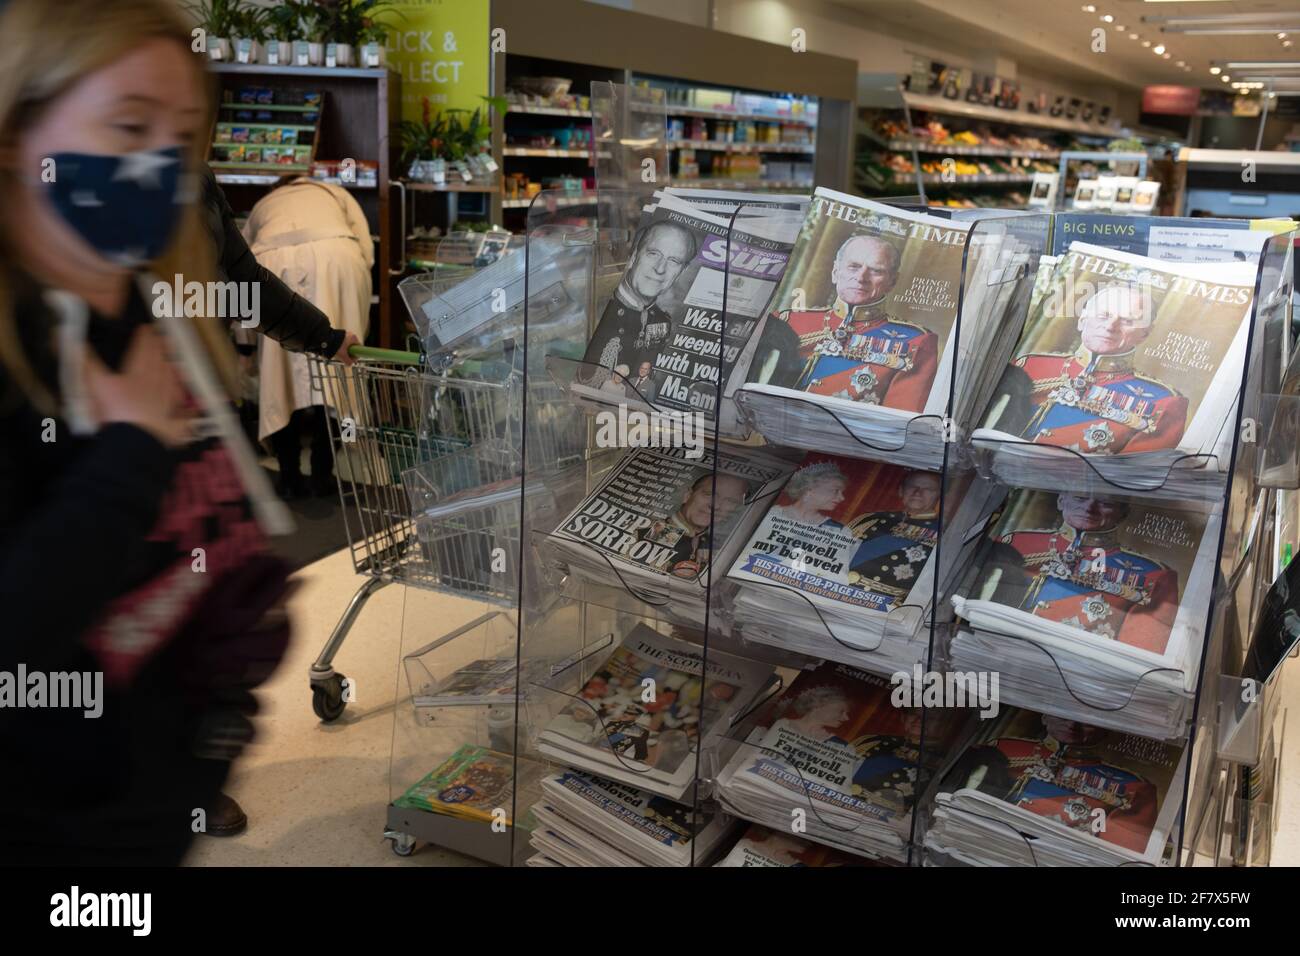 Glasgow, UK, 10th April 2021. Shoppers, wearing face masks due to the Covid-19 CoronaVirus health pandemic, pass by a display of newspapers announcing the death of His Royal Highness Prince Philip, Duke of Edinburgh, at the age of 99-years. Photo credit: Jeremy Sutton-Hibbert/Alamy Live News Stock Photo